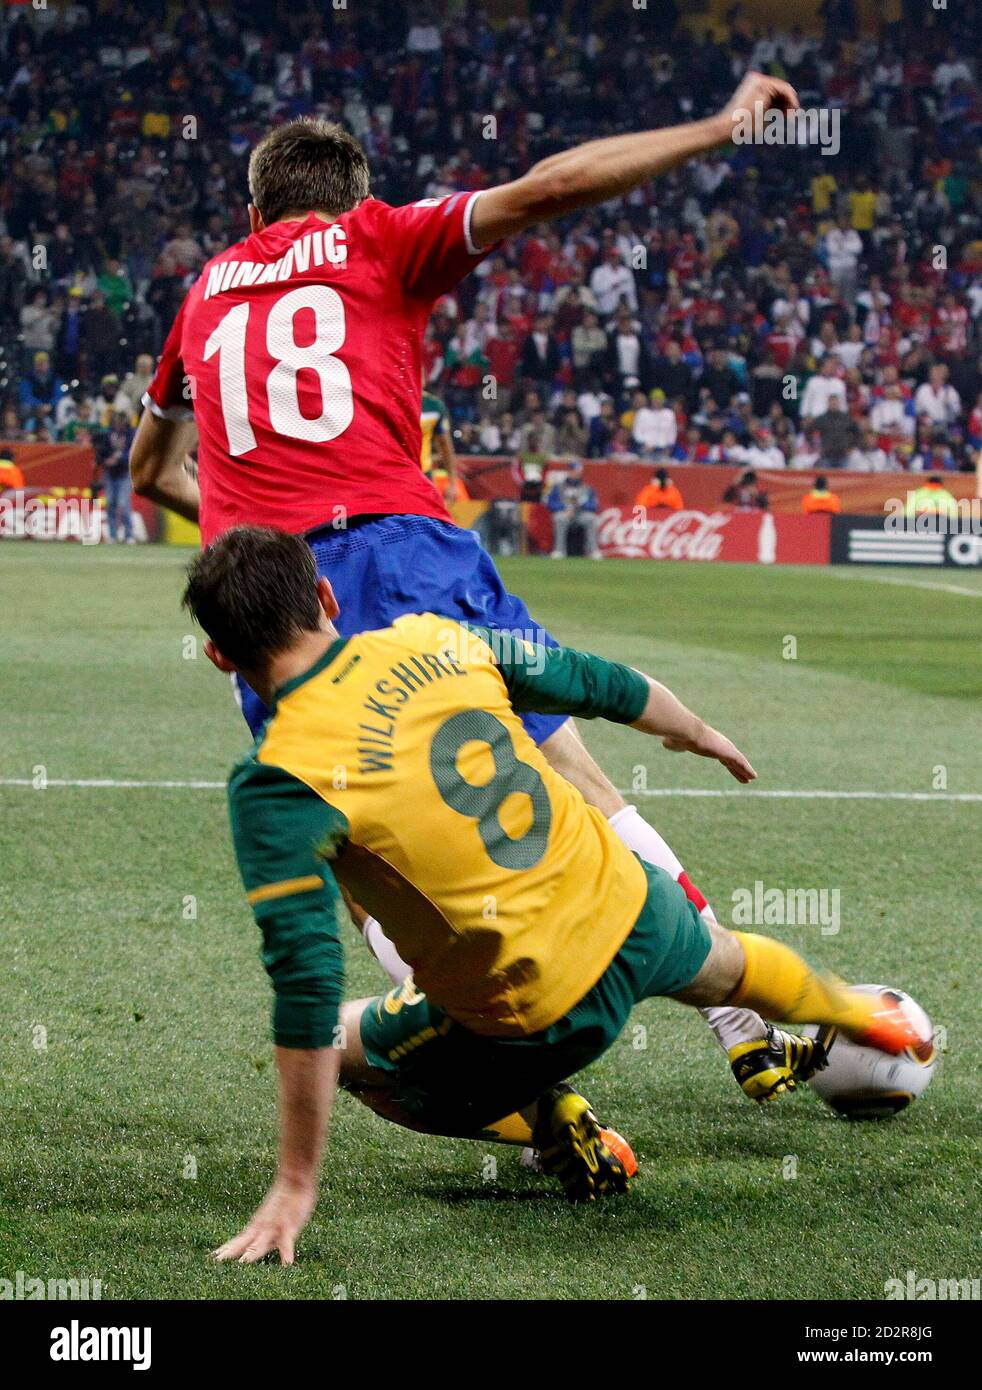 Australia's Luke Wilkshire tackles Serbia's Milos Ninkovic from behind and receives a yellow card thereafter during a 2010 World Cup Group D soccer match at Mbombela stadium in Nelspruit June 23, 2010.   REUTERS/Thomas Mukoya (SOUTH AFRICA  - Tags: SPORT SOCCER WORLD CUP) Stock Photo